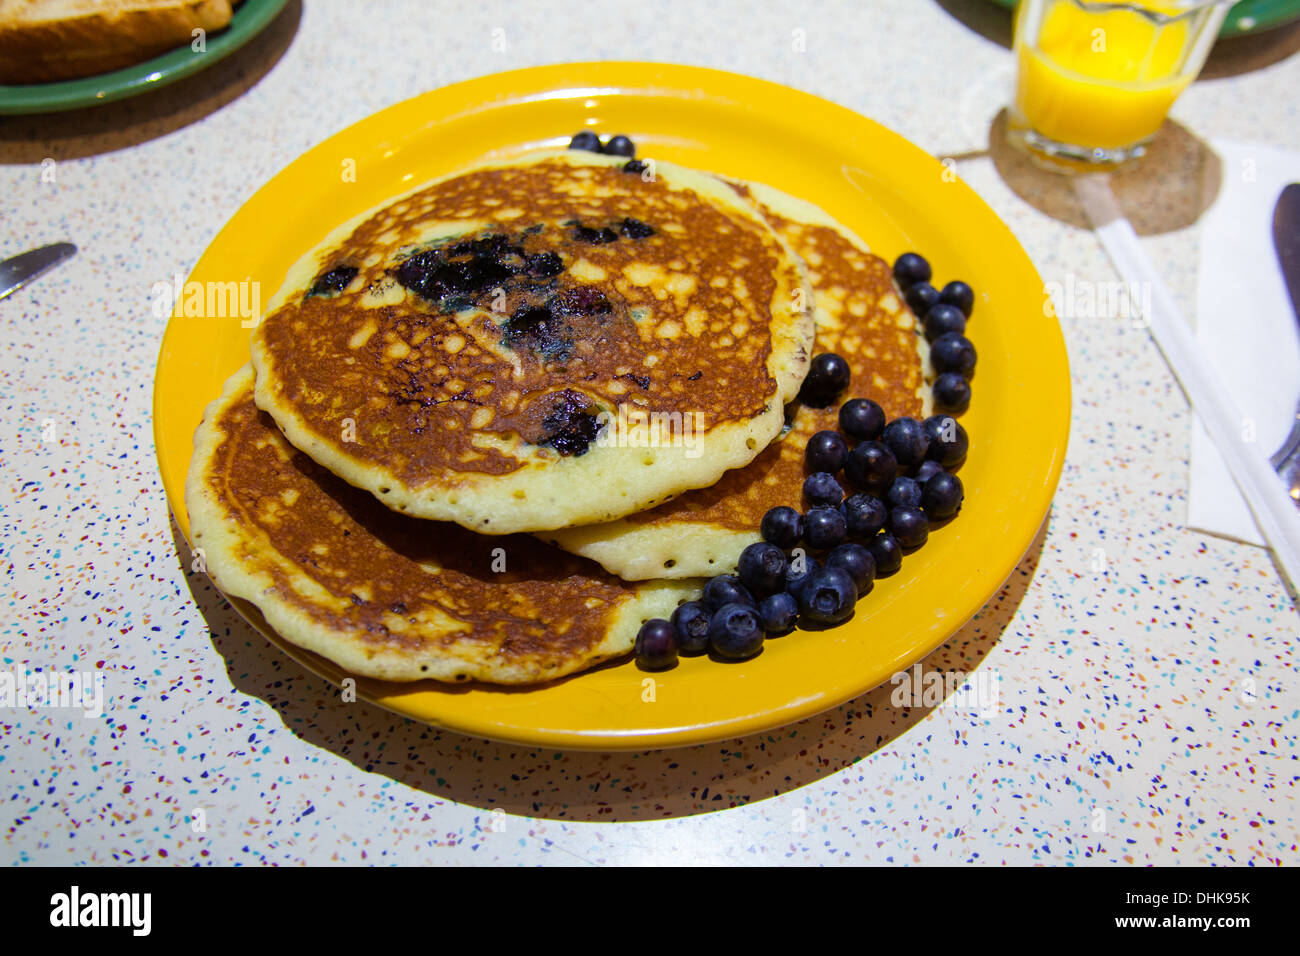 Blueberry breakfast pancake's, Tick tock diner at the New Yorker Hotel, Eighth Avenue, Manhattan, New York City, United States o Stock Photo